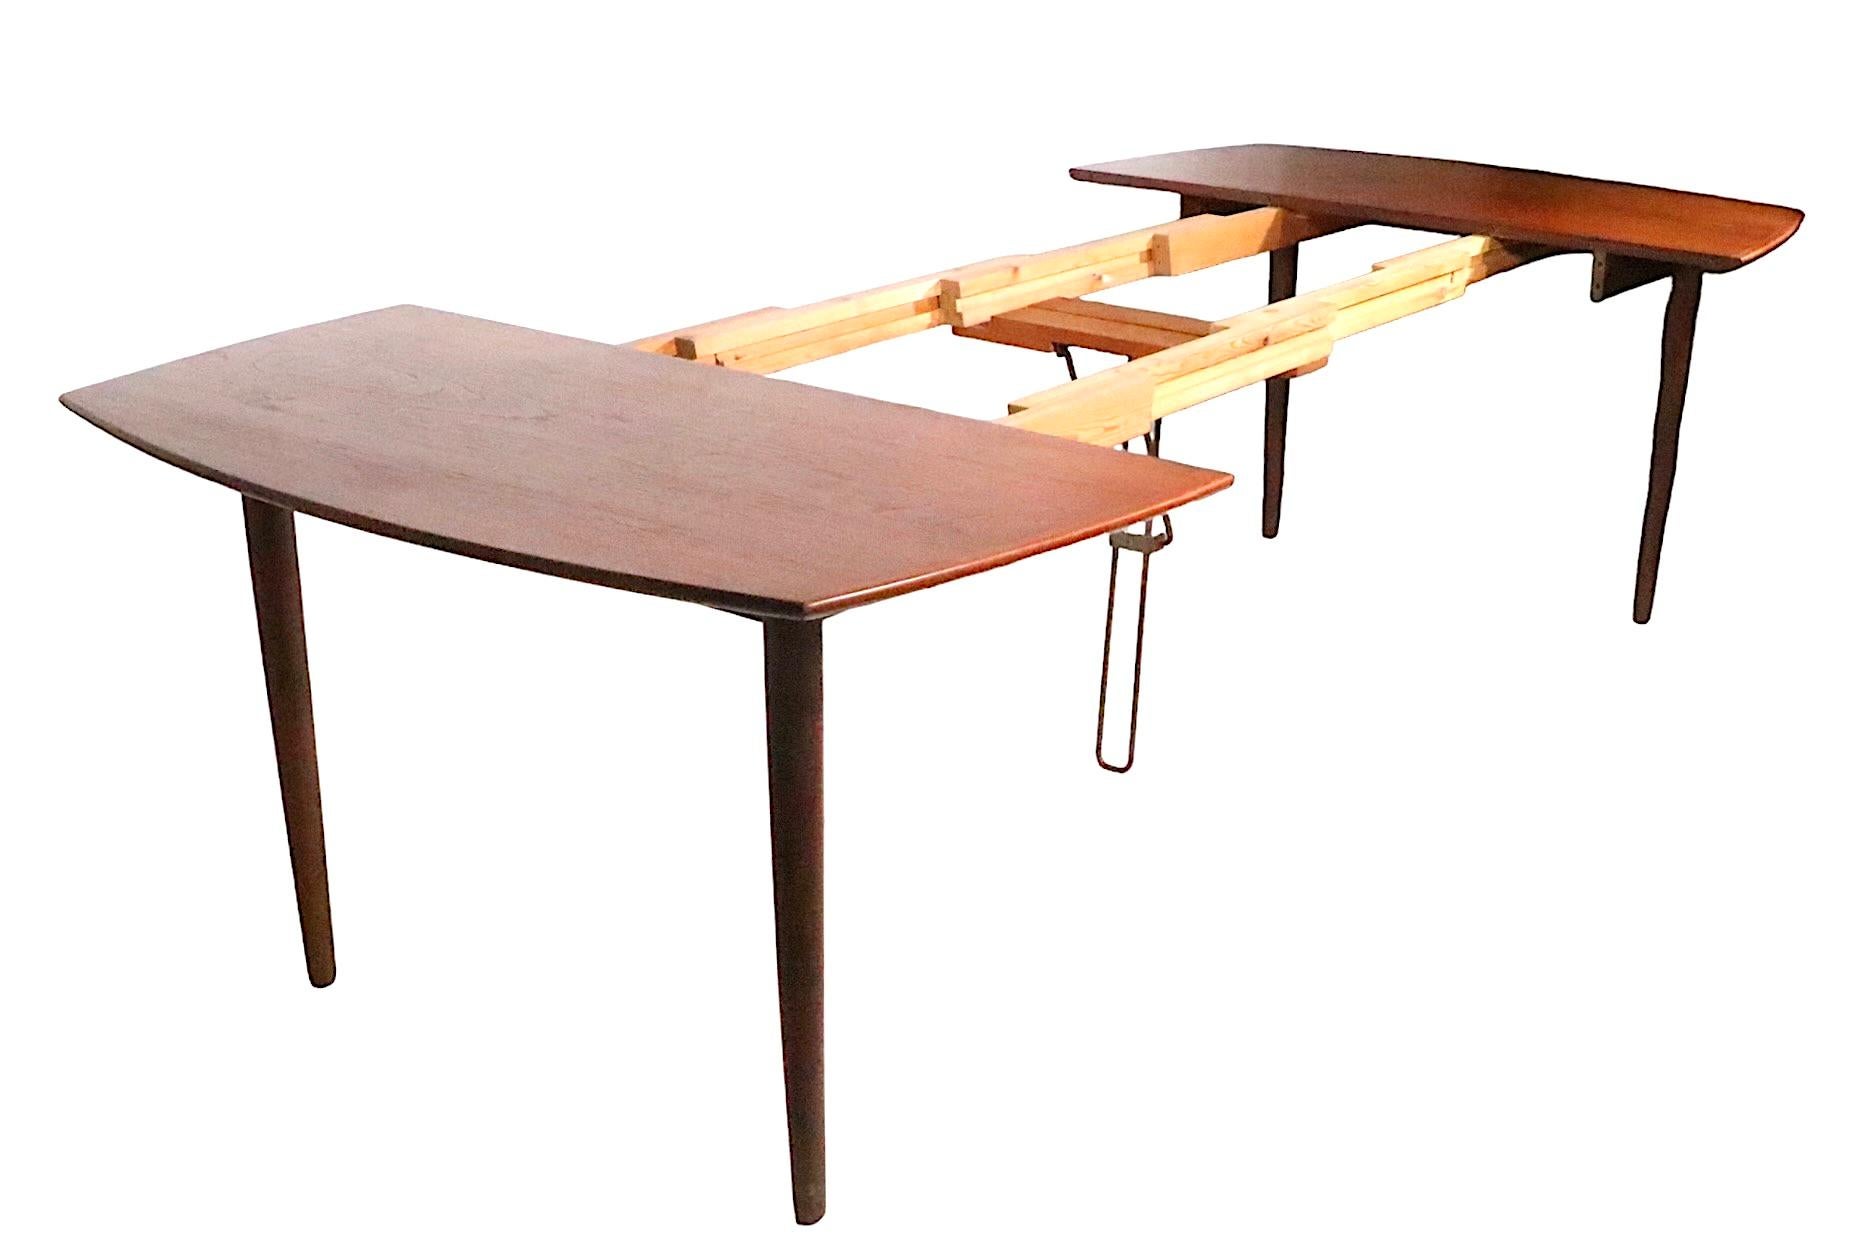 Danish Mid Century Modern Teak Extension  Dining Table by H W Klein  c 1950's For Sale 10